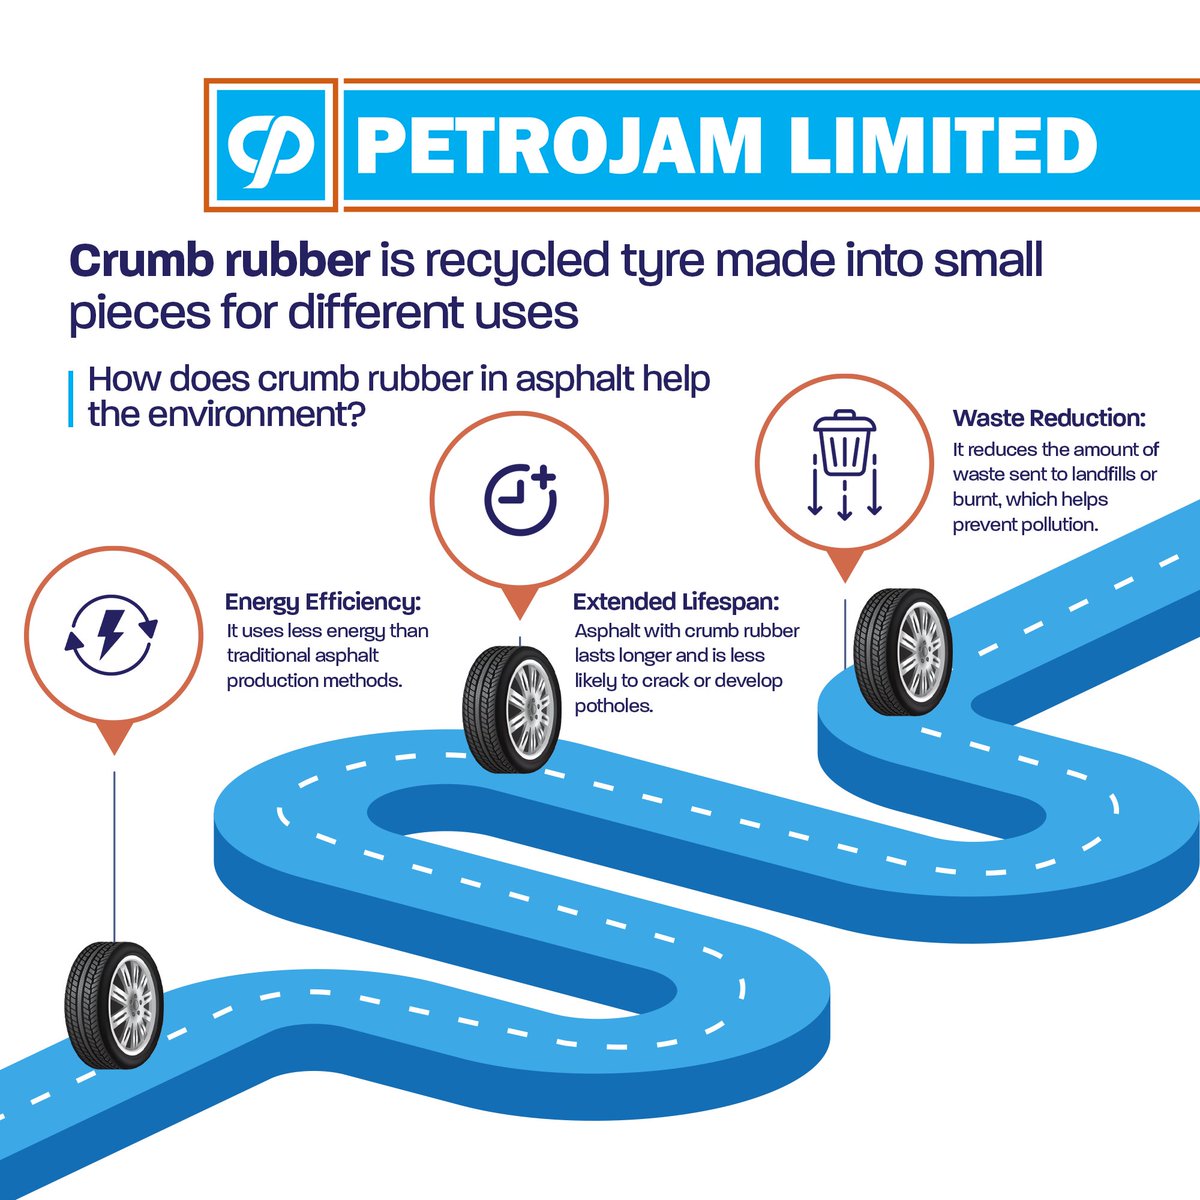 Learn how using crumb rubber in asphalt benefits the environment! 🌱 It reduces waste, extends road life expectancy, and saves energy, paving the way for a sustainable tomorrow. 🛣️ 
#CrumbRubber #Environment #SustainableInfrastructure #Petrojam